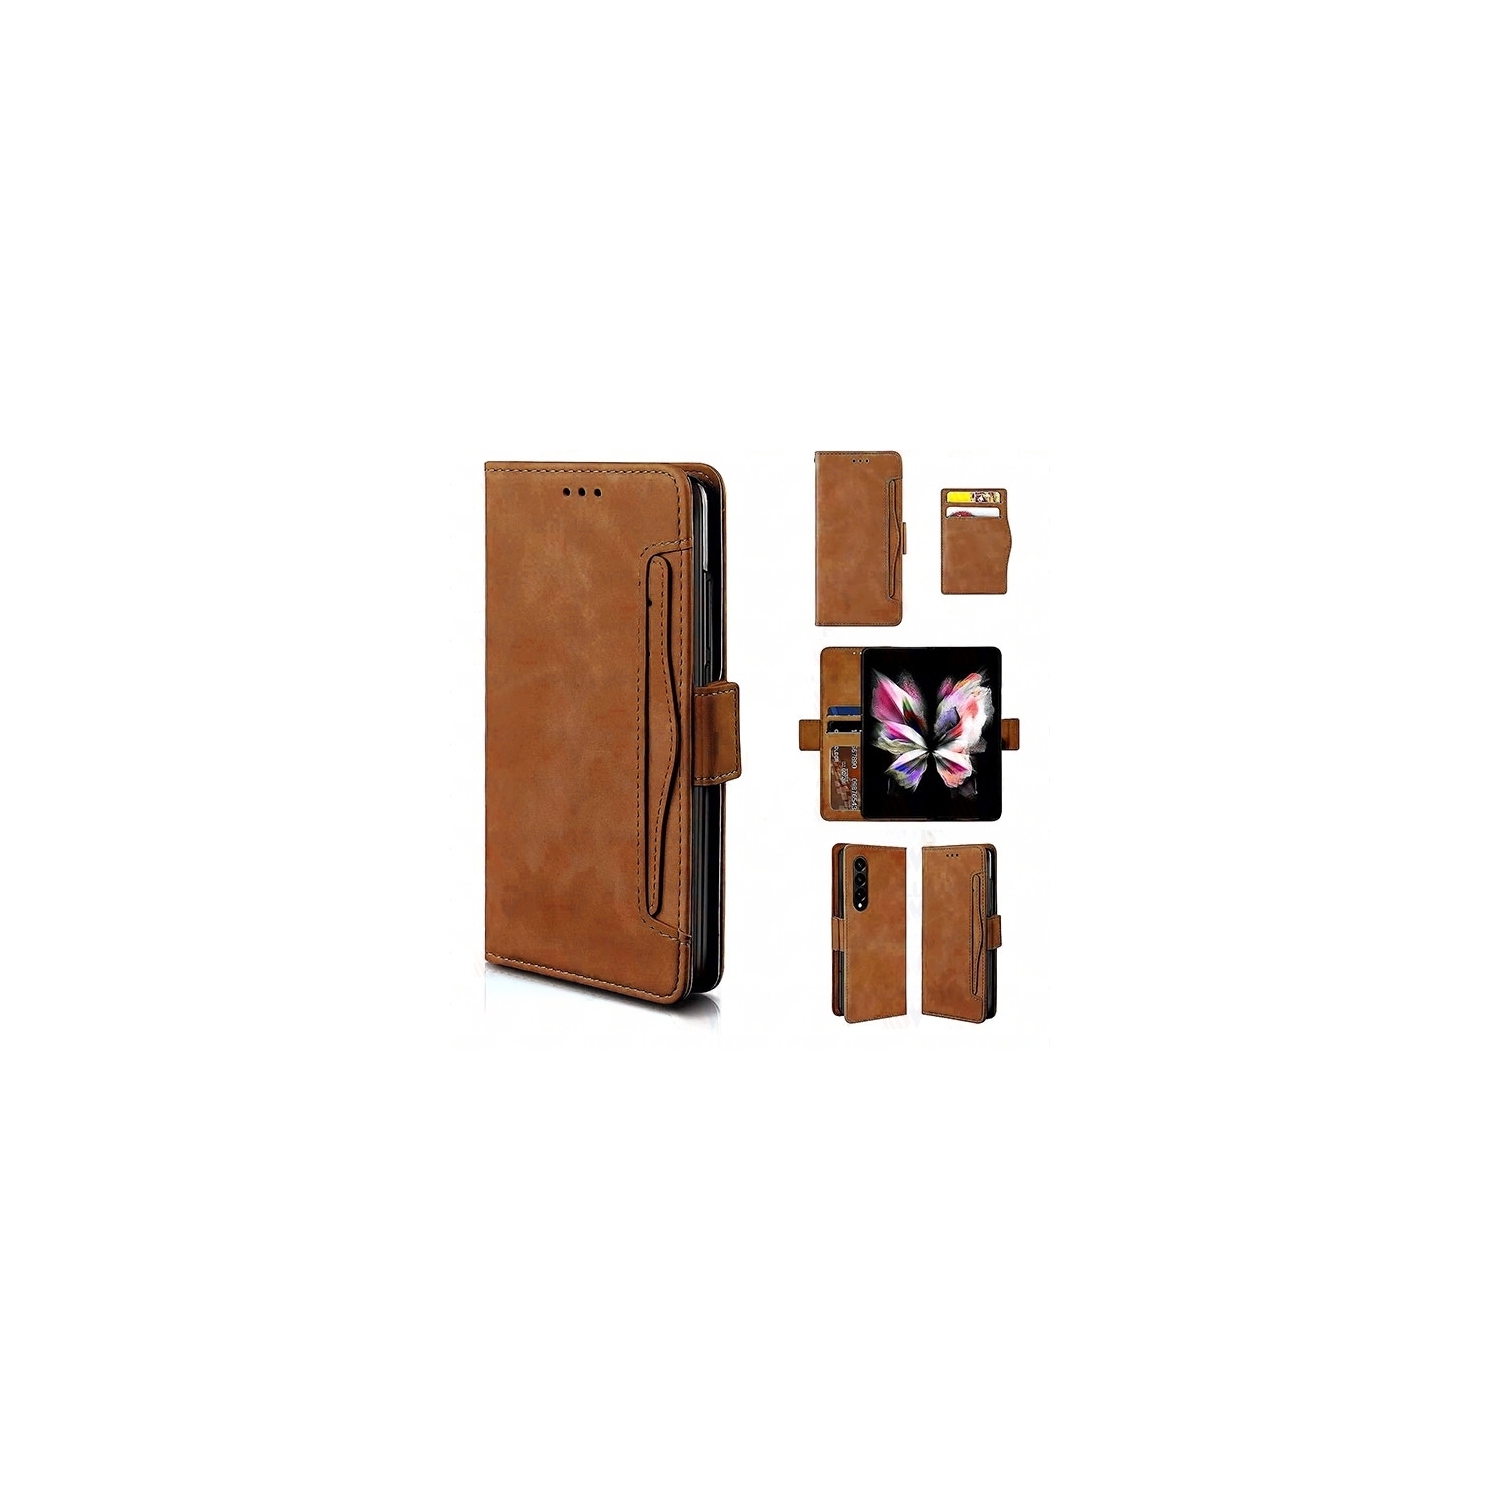 [CS] Samsung Galaxy Z Fold 5 5G 2023 Case, Magnetic Leather Folio Wallet Flip Case Cover with Card Slot, Brown